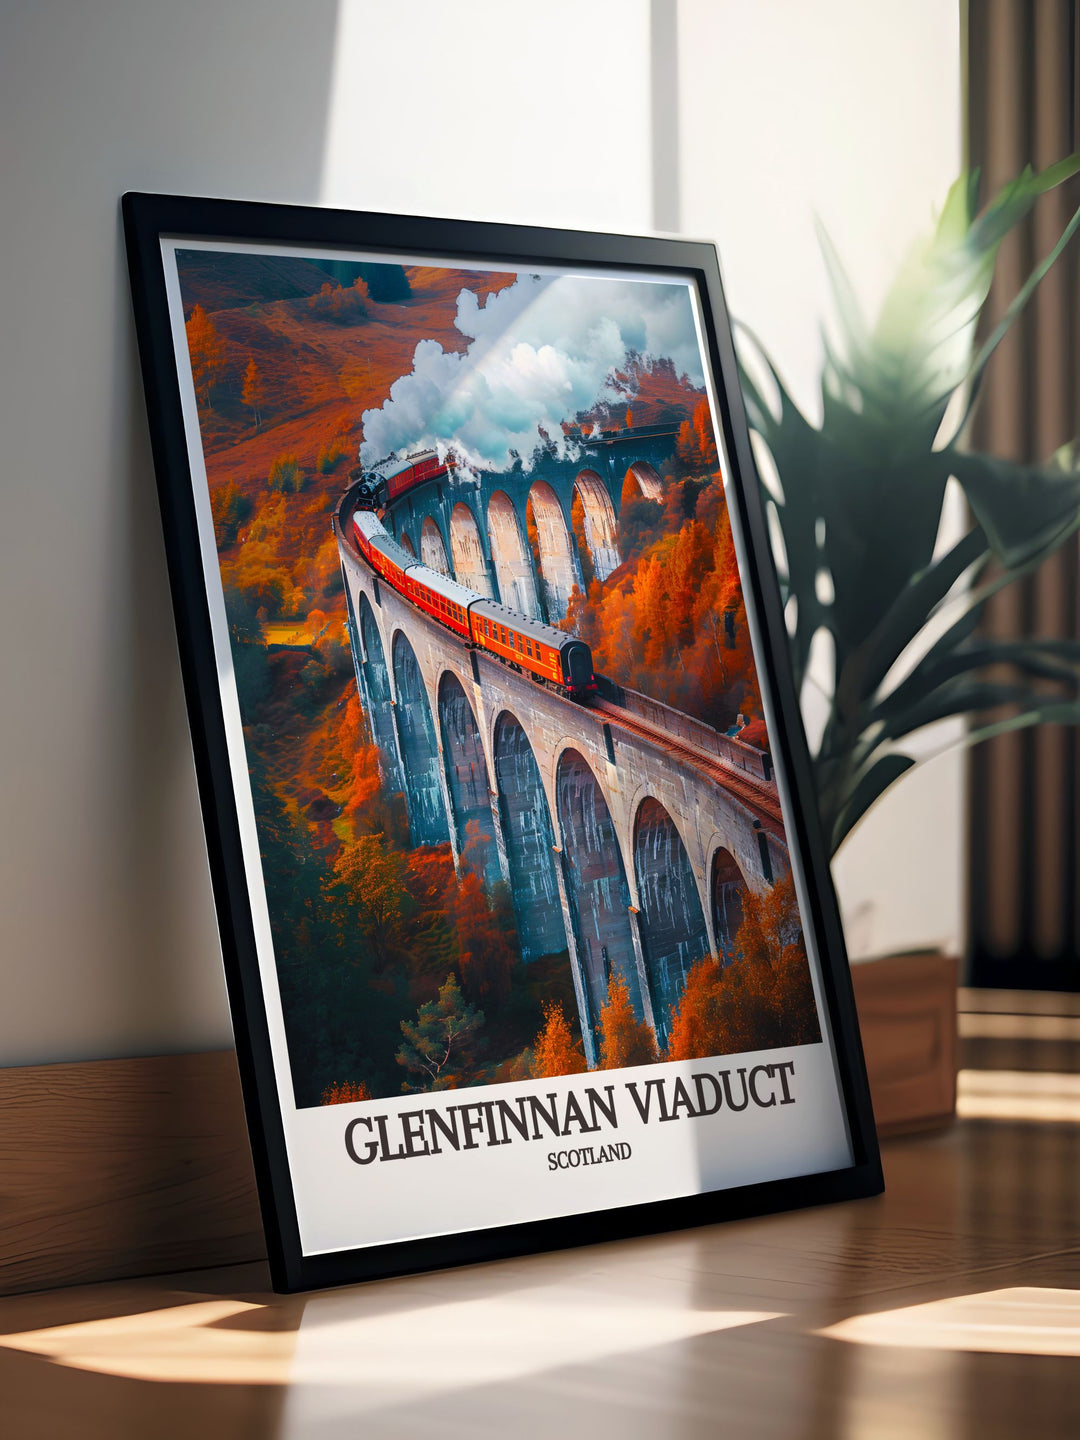 Canvas art featuring the Glenfinnan Viaduct, highlighting the picturesque landscape and historical significance of this Scottish landmark, a great addition for fans of railway history.